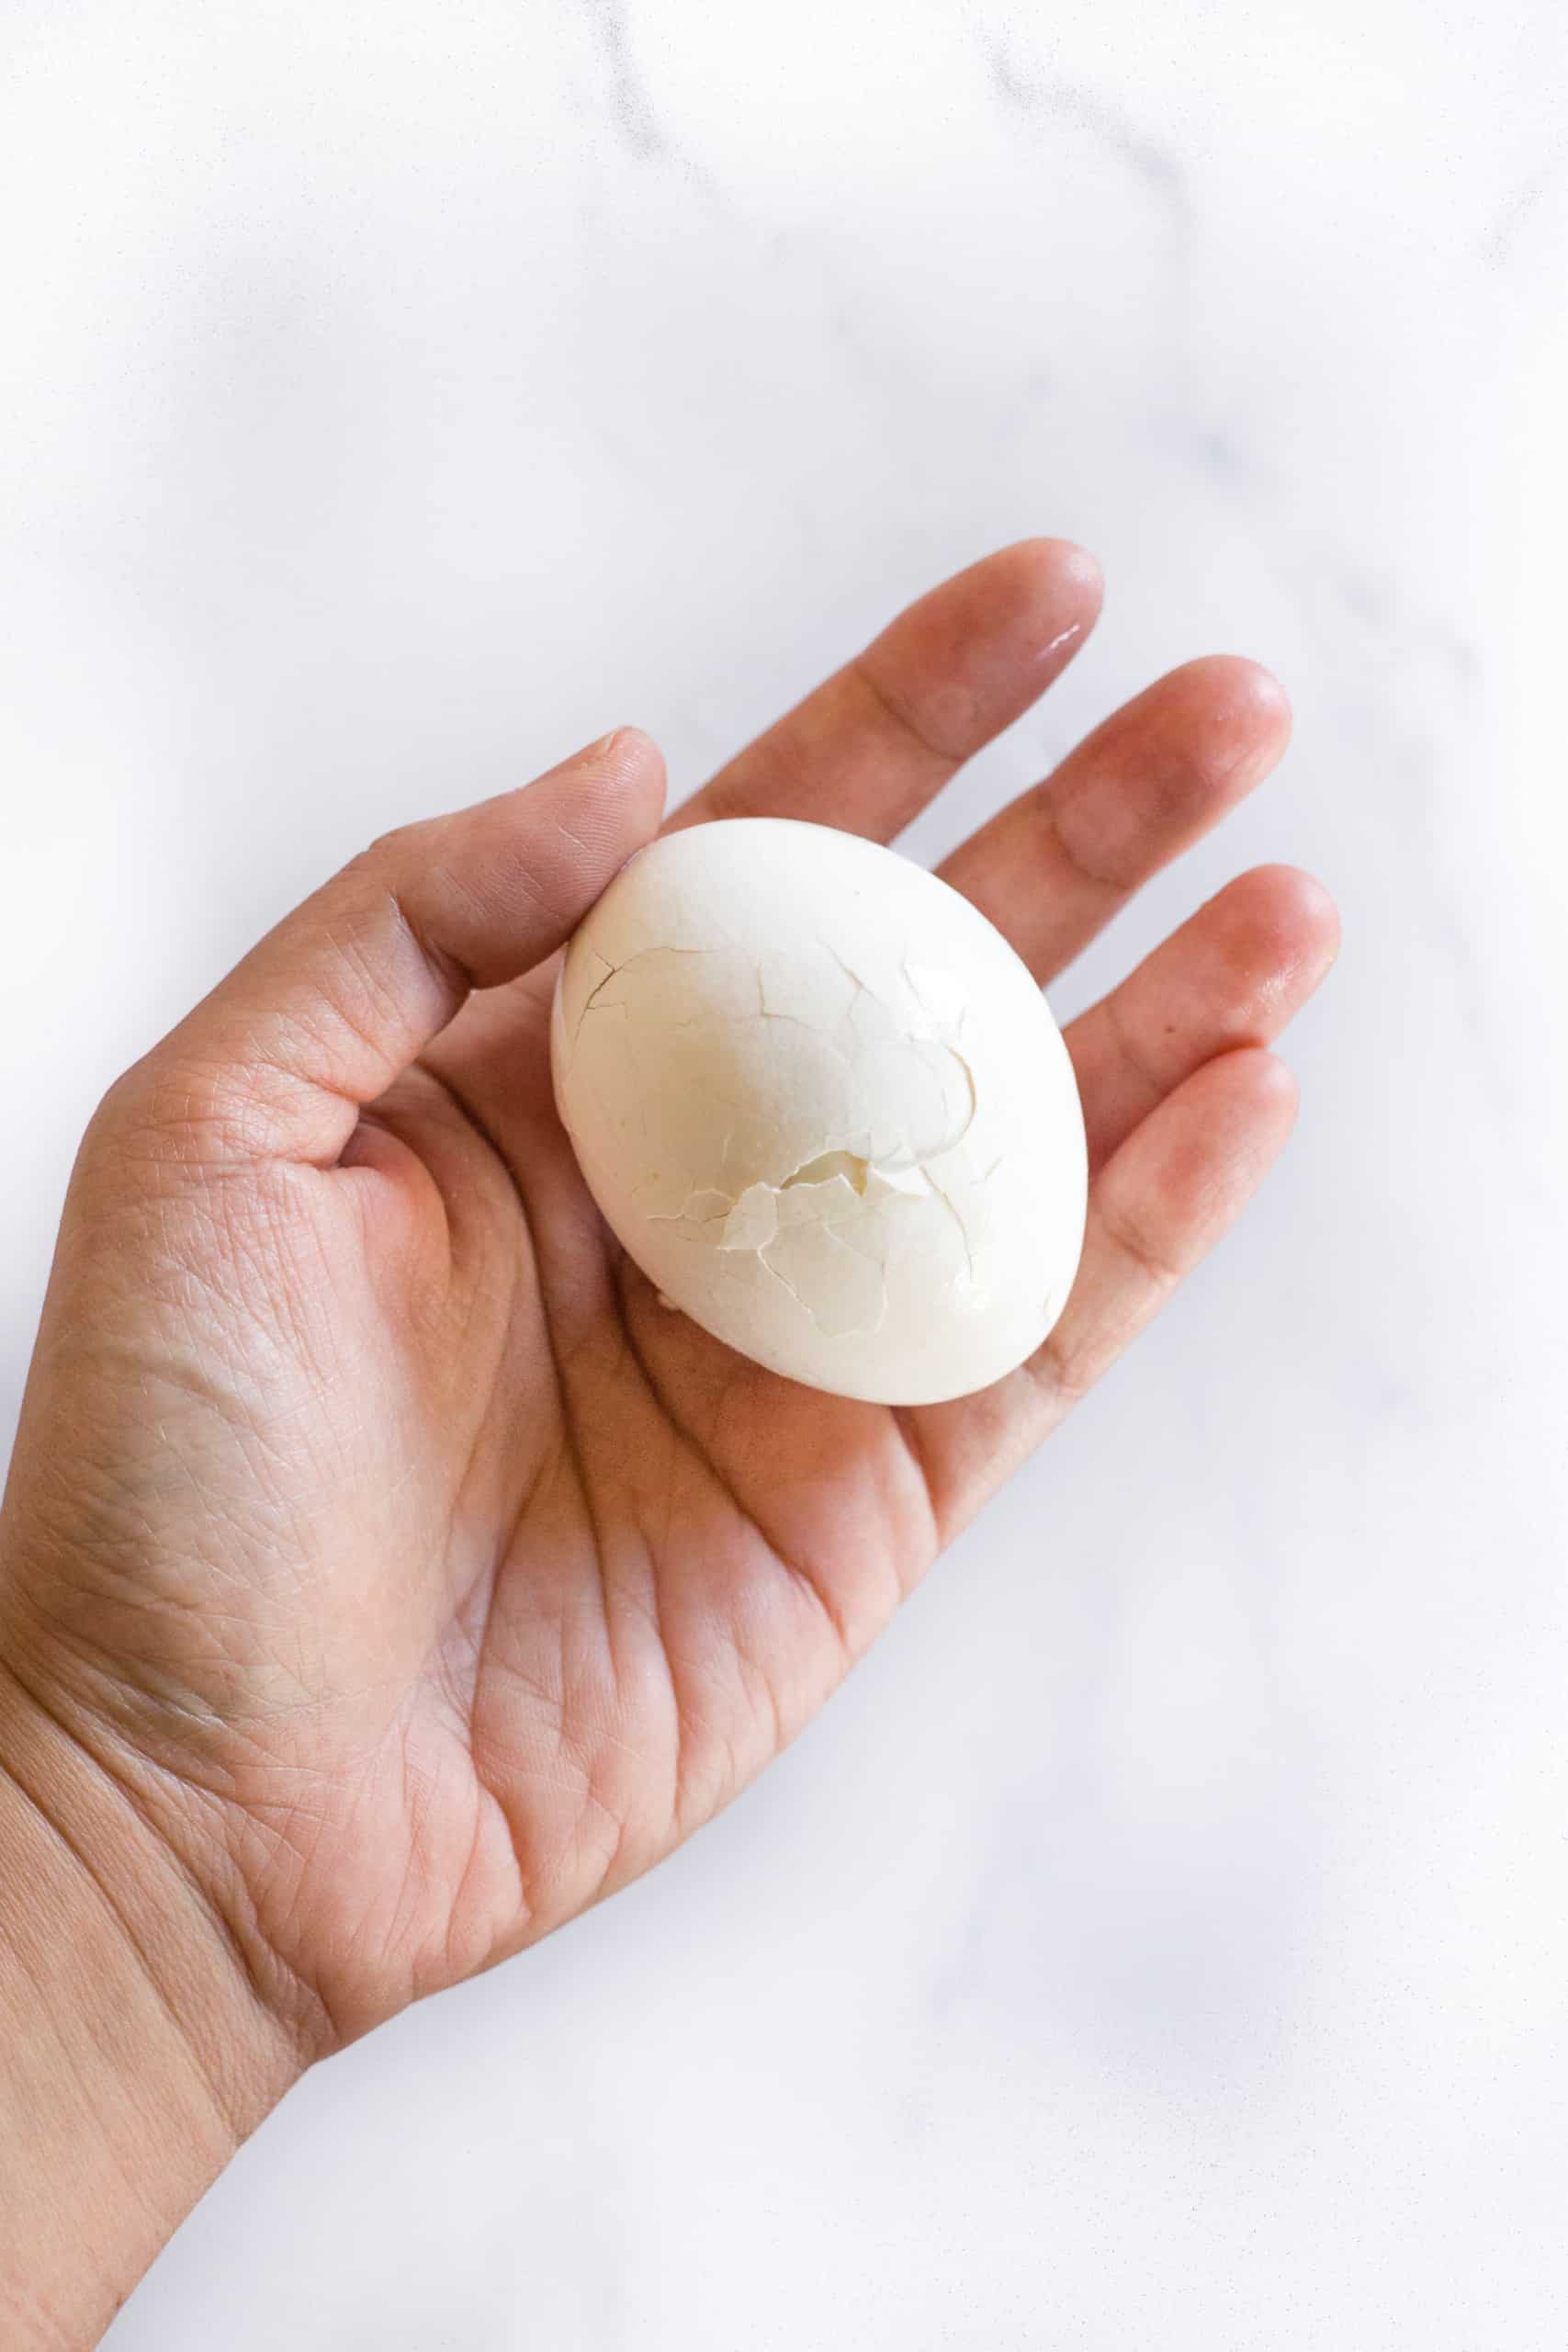 Hand holding an egg with the shell cracked.